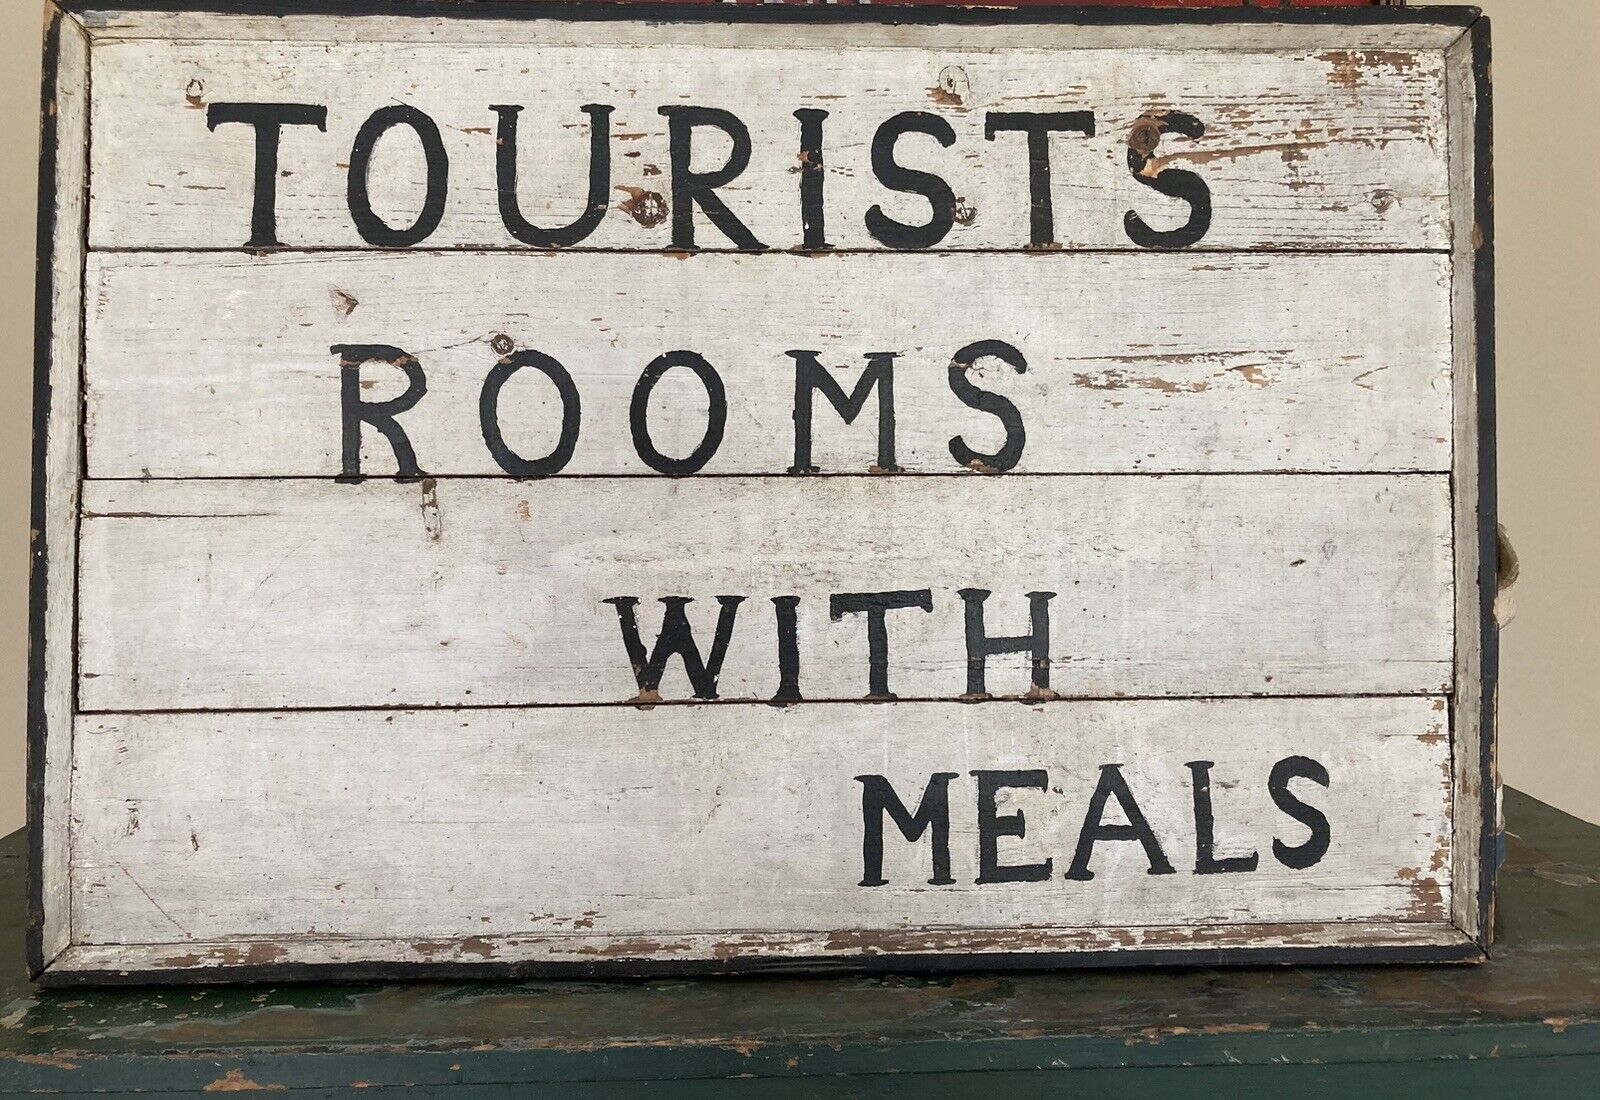 Antique Wooden Double Sided Tourists Rooms Meals Sign